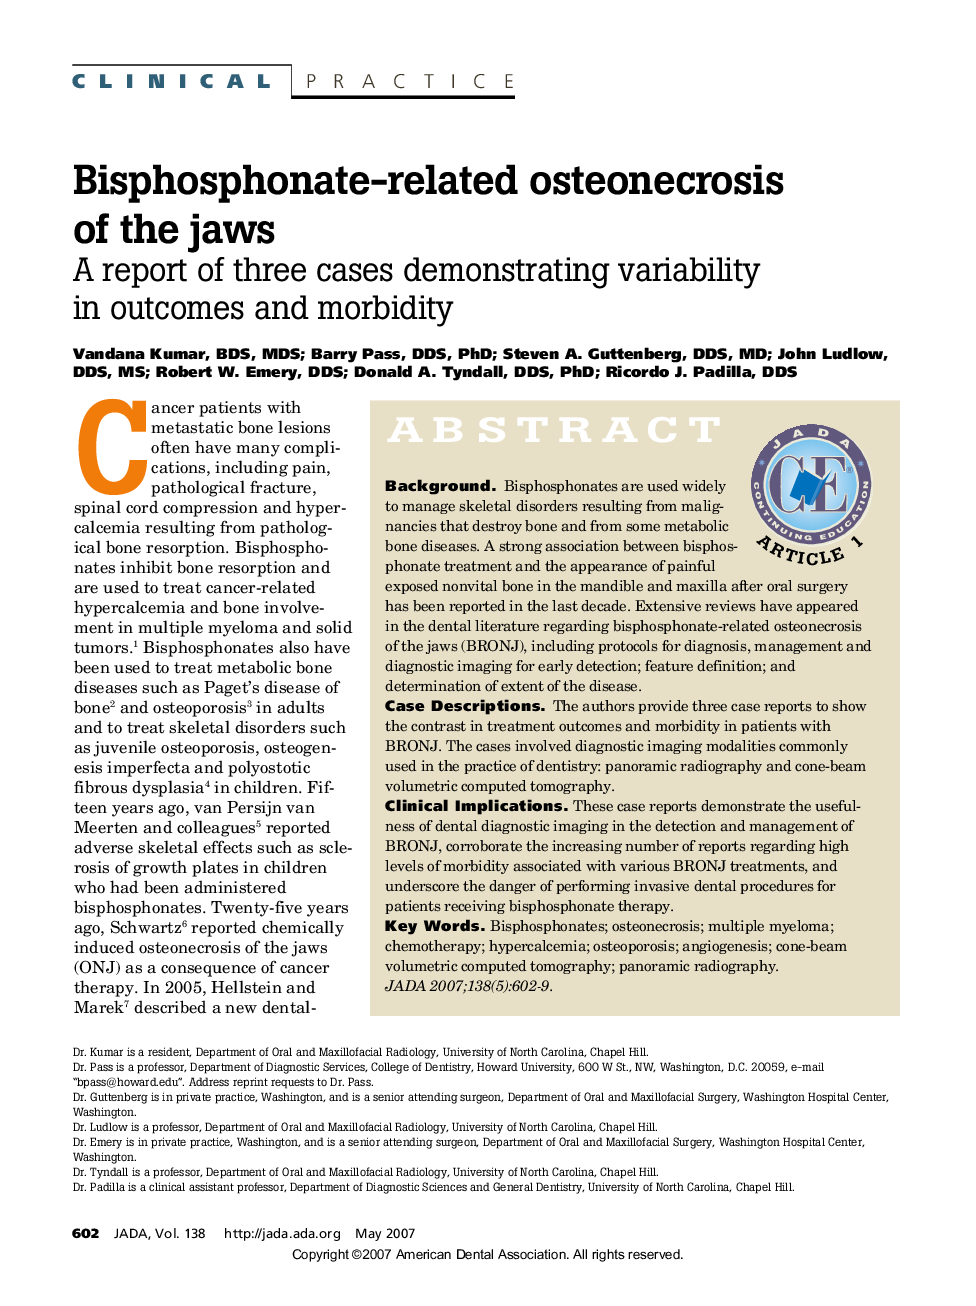 Bisphosphonate-related osteonecrosis of the jaws: A report of three cases demonstrating variability in outcomes and morbidity